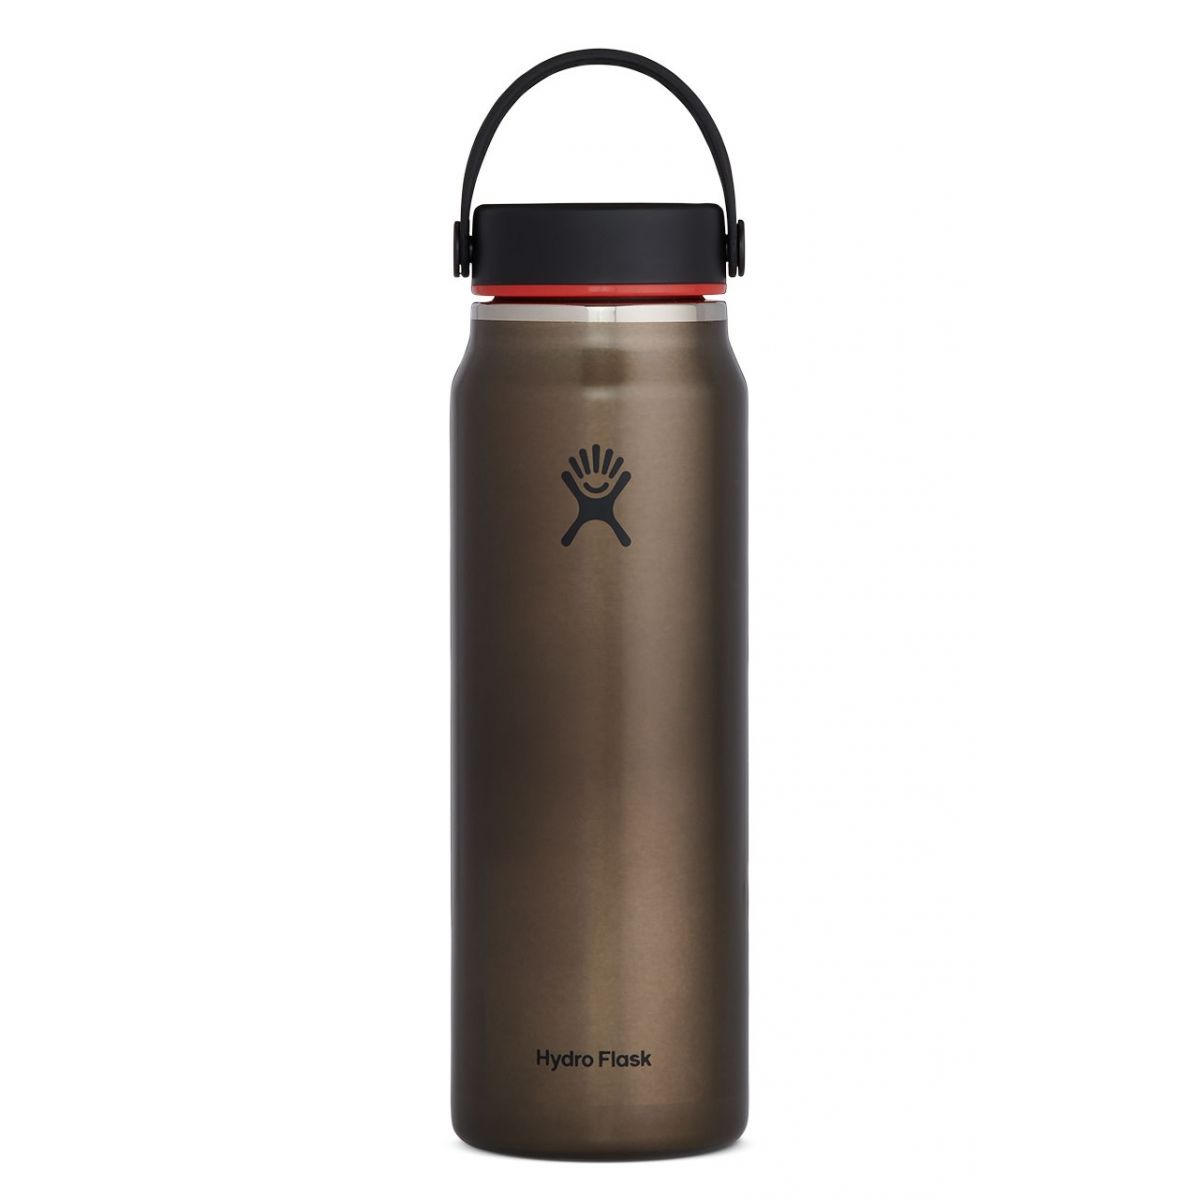 Hydro Flask Trail Series Wide Mouth Lightweight 0.95l/32oz - Stainless Steel BPA-Free Obsidian Cutlery